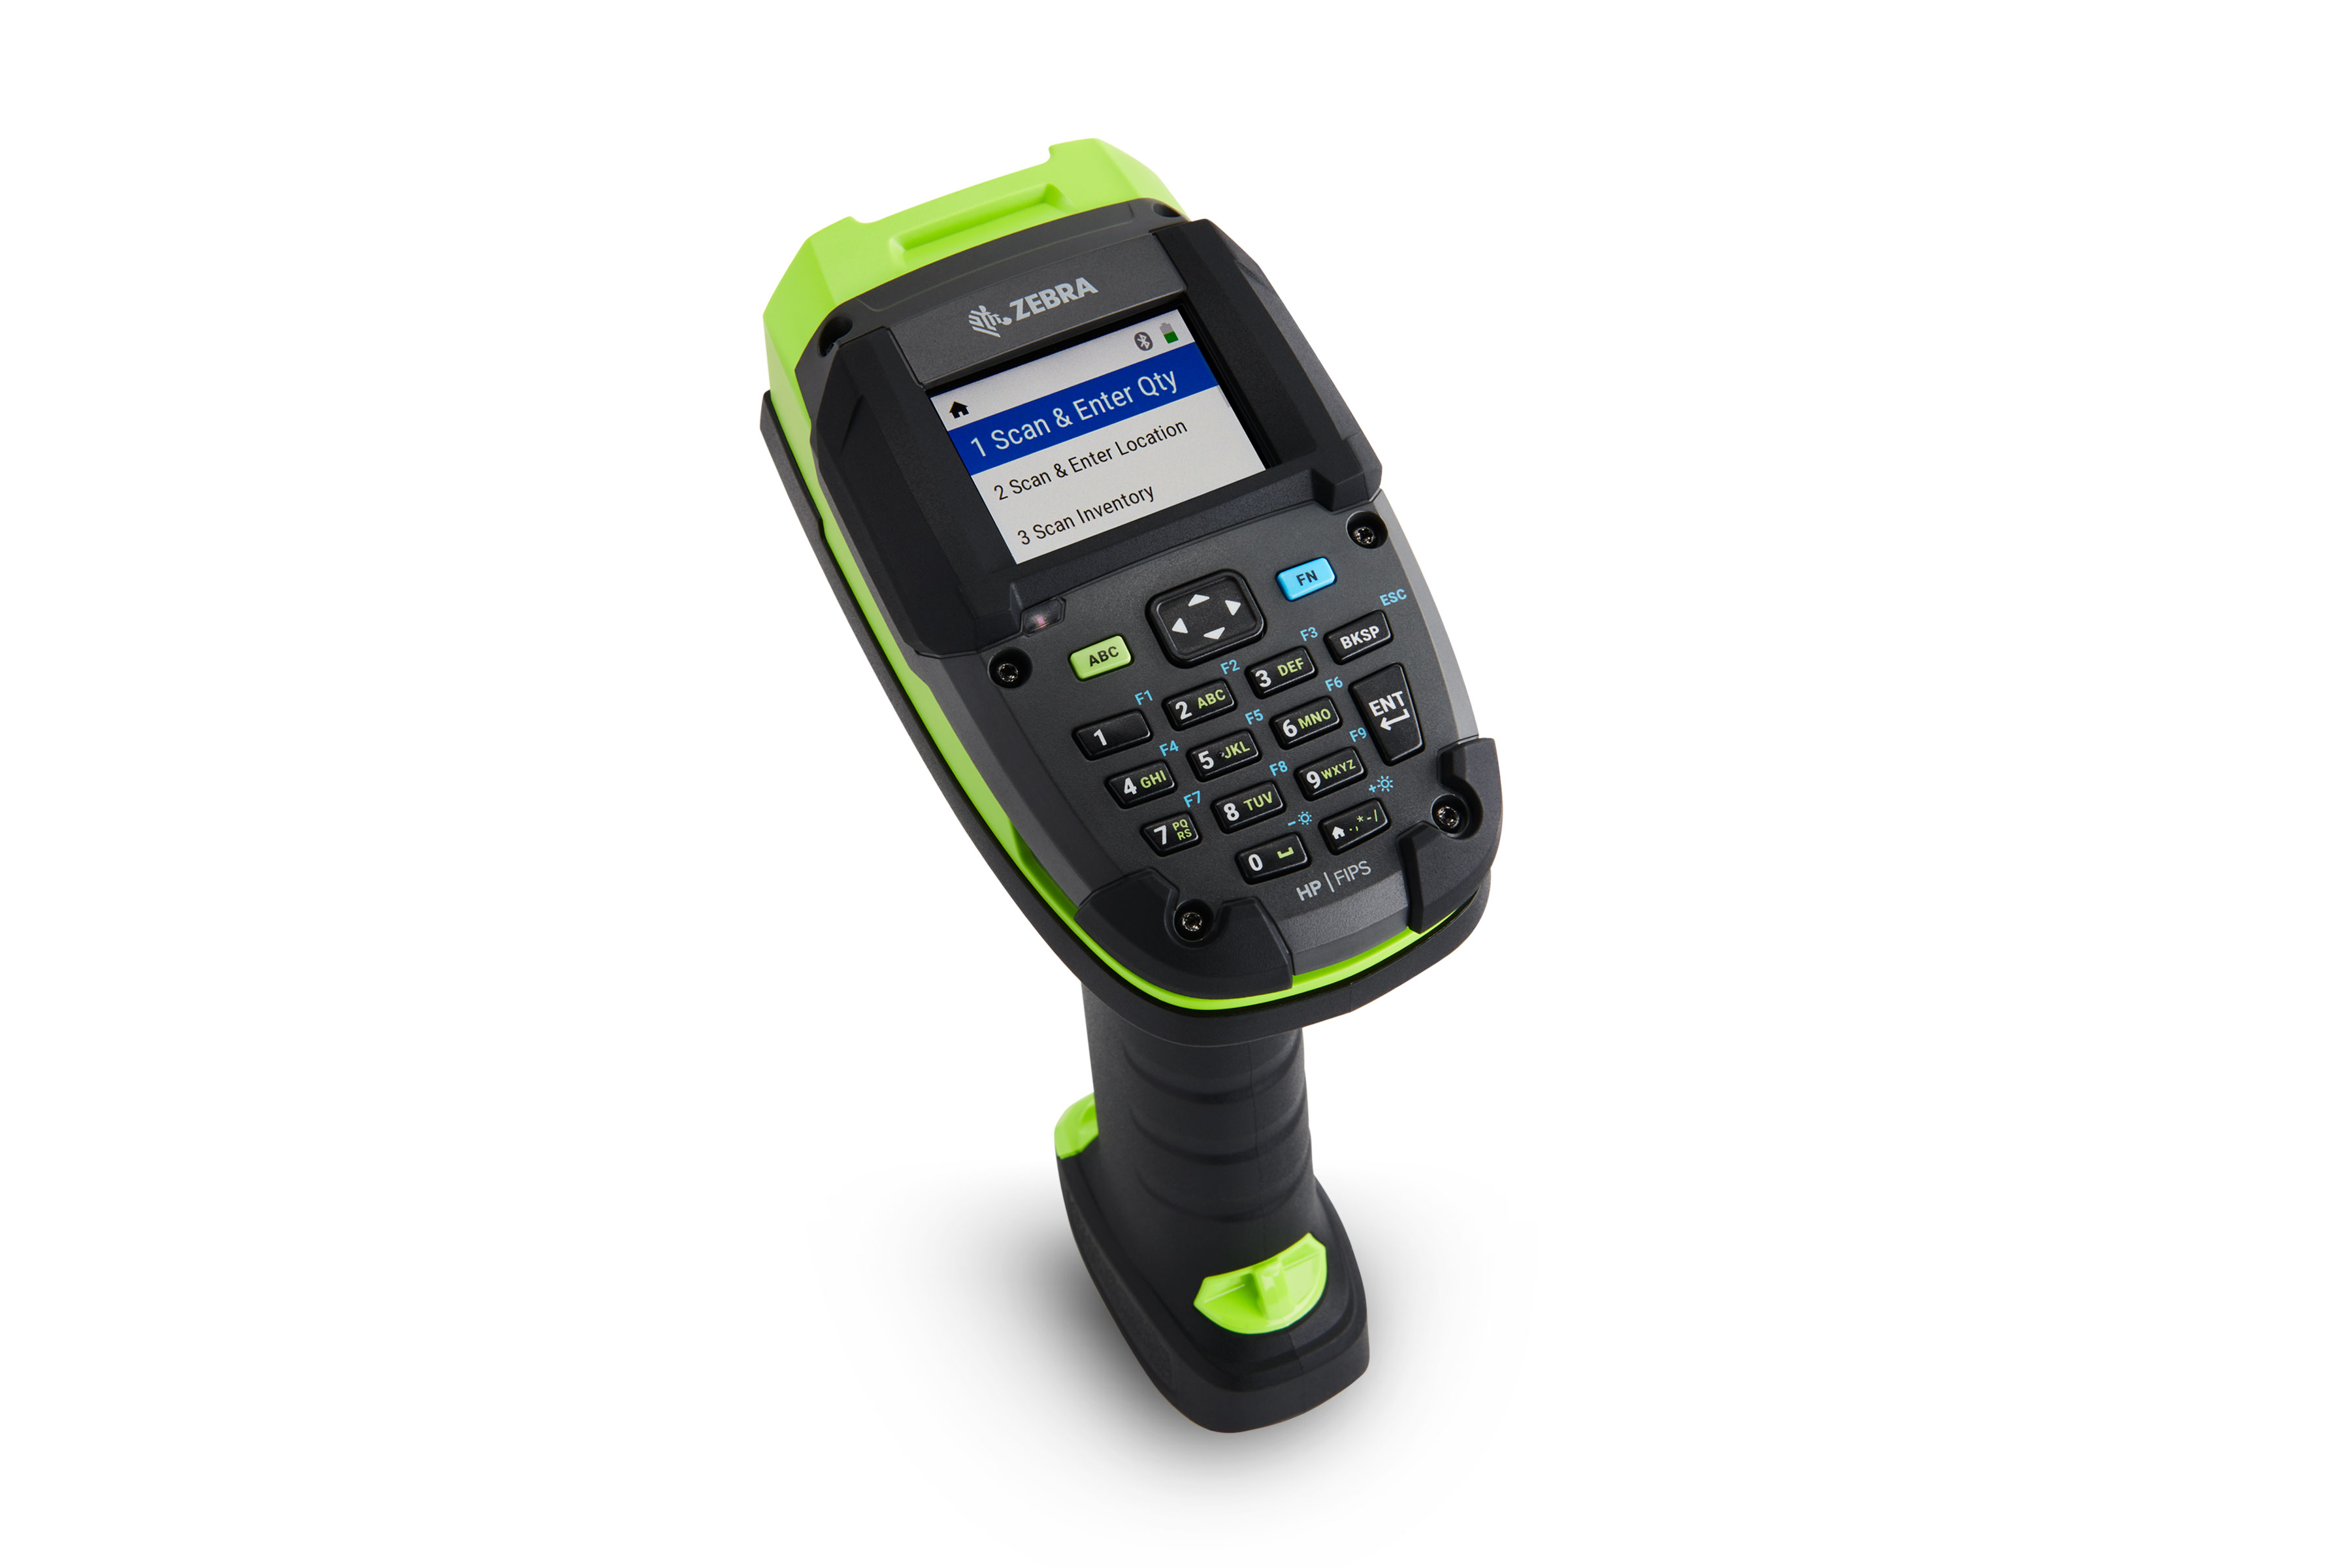 Zebra DS3600-KD barcode scanner with keypad and color display, green and black hardware